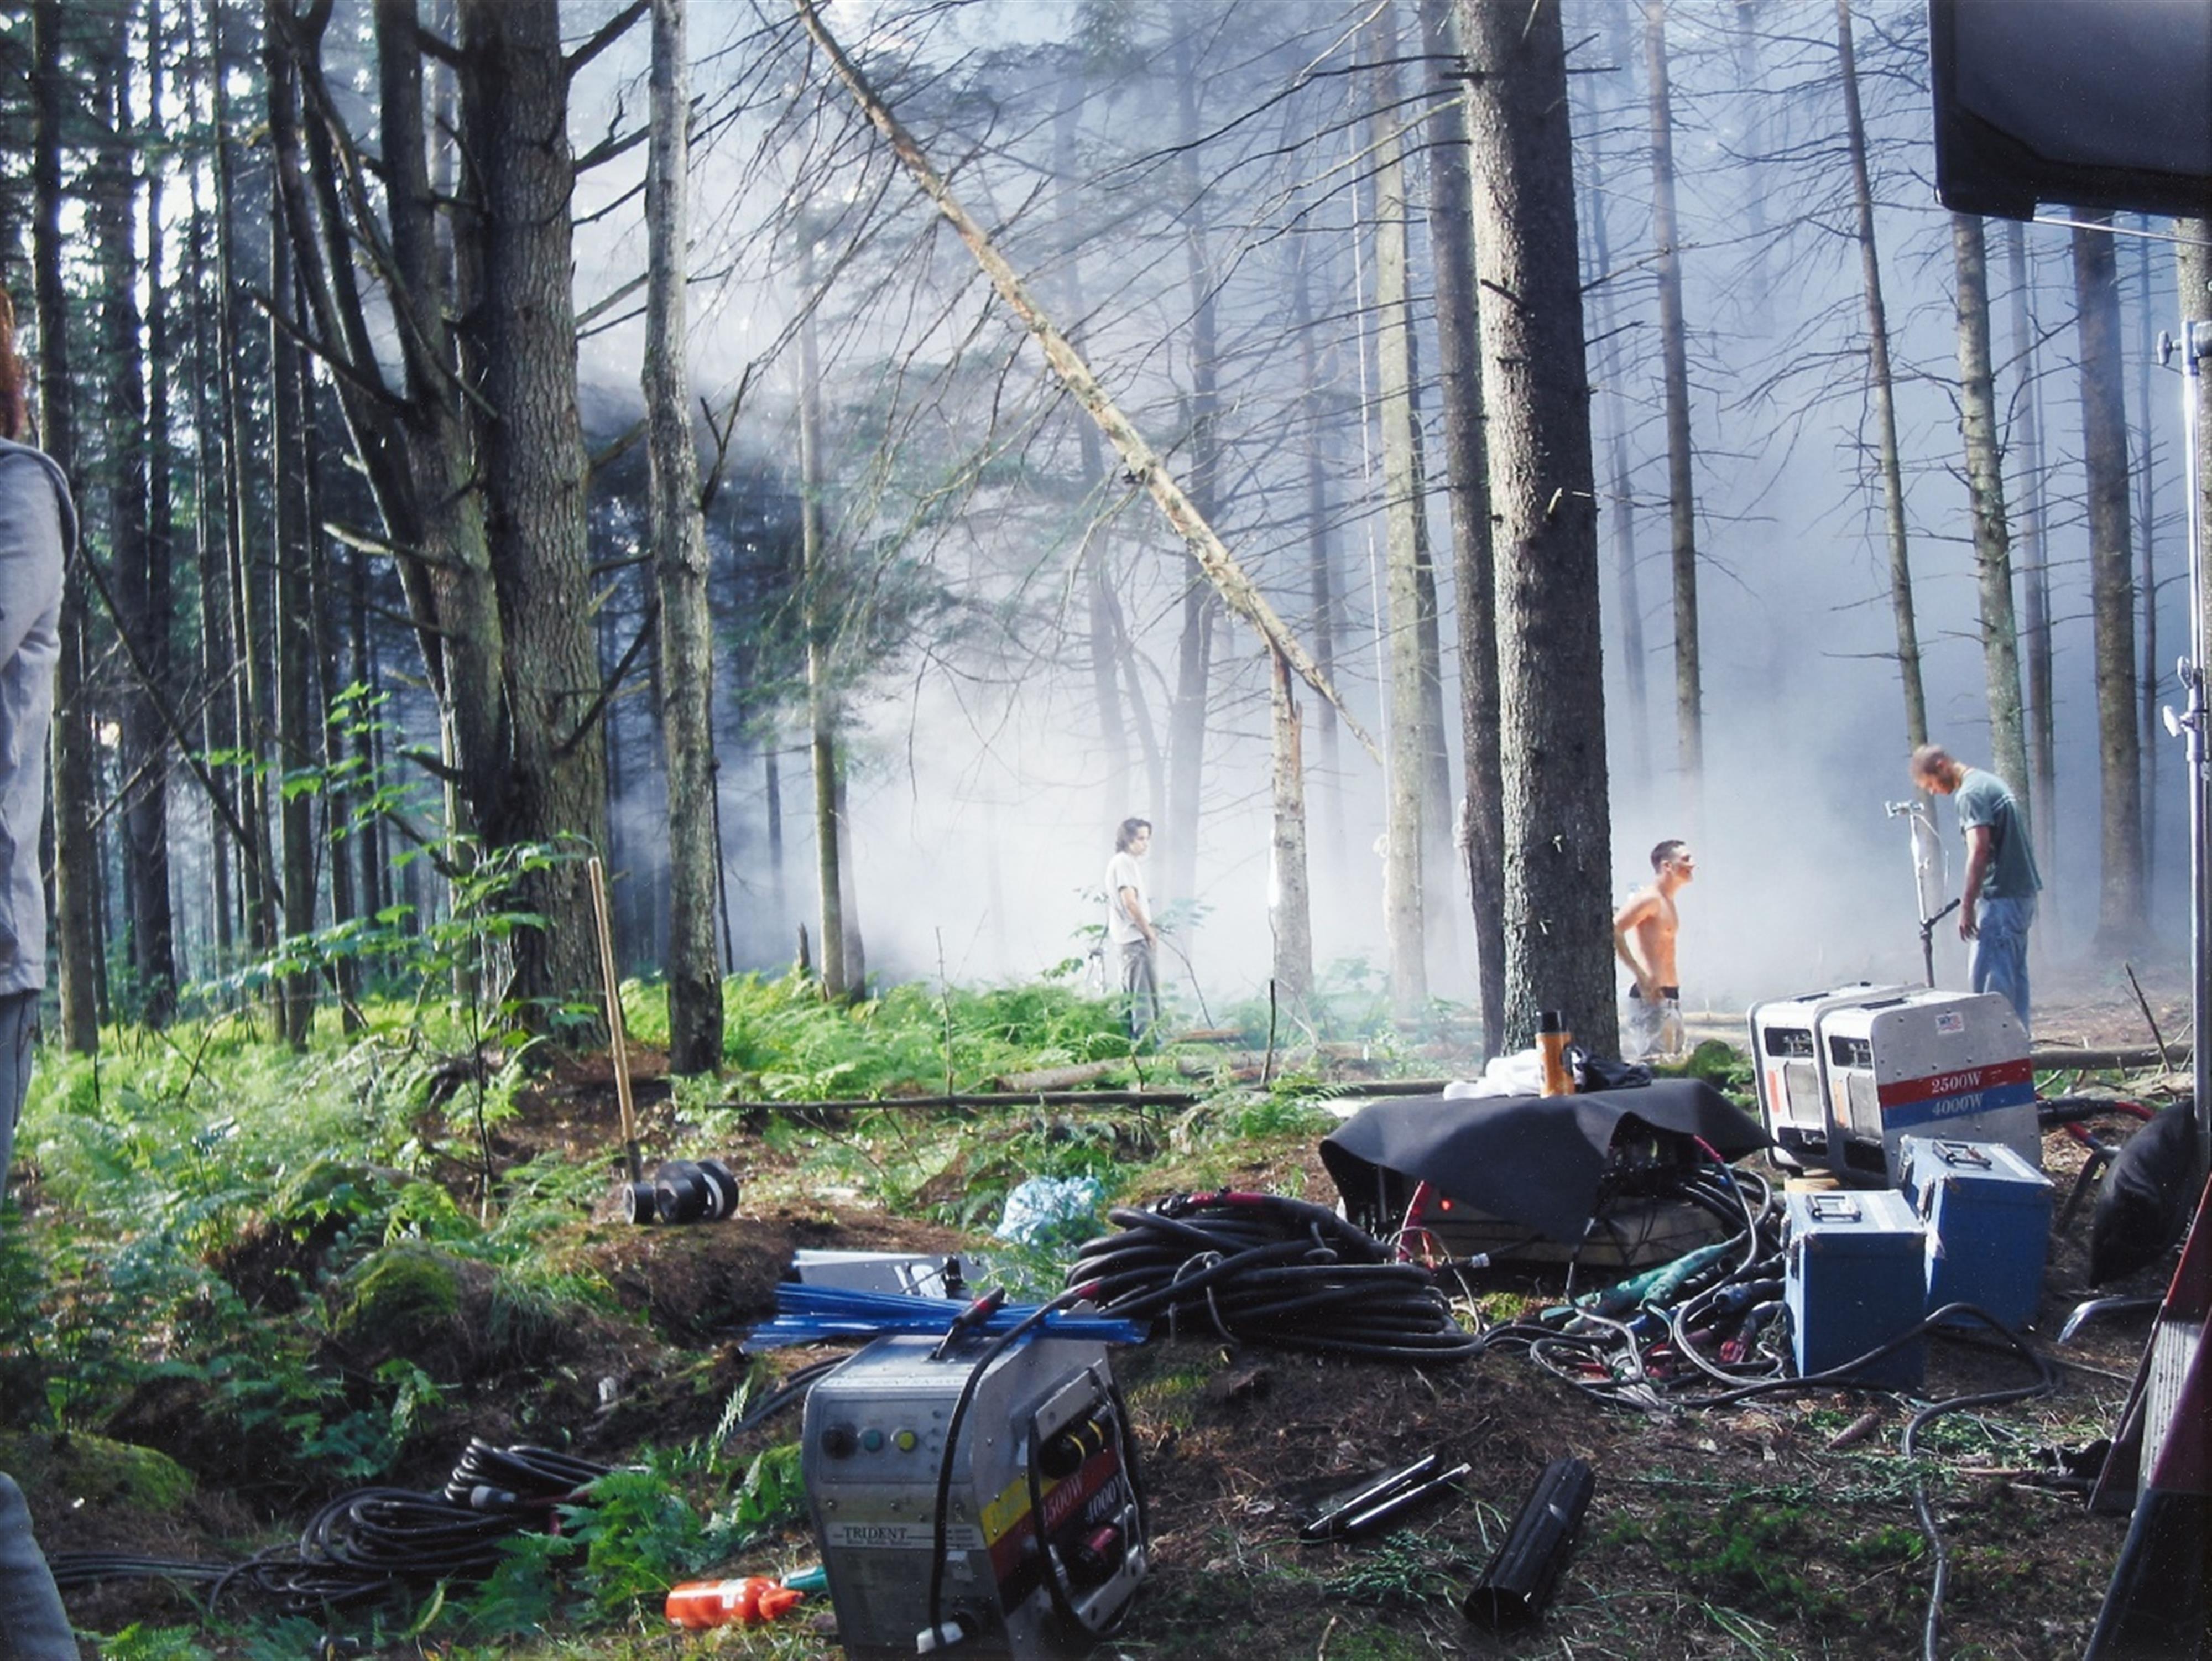 Gregory Crewdson - Production Still Forest Gathering #1 (from the series: "Beneath the Roses") - image-1